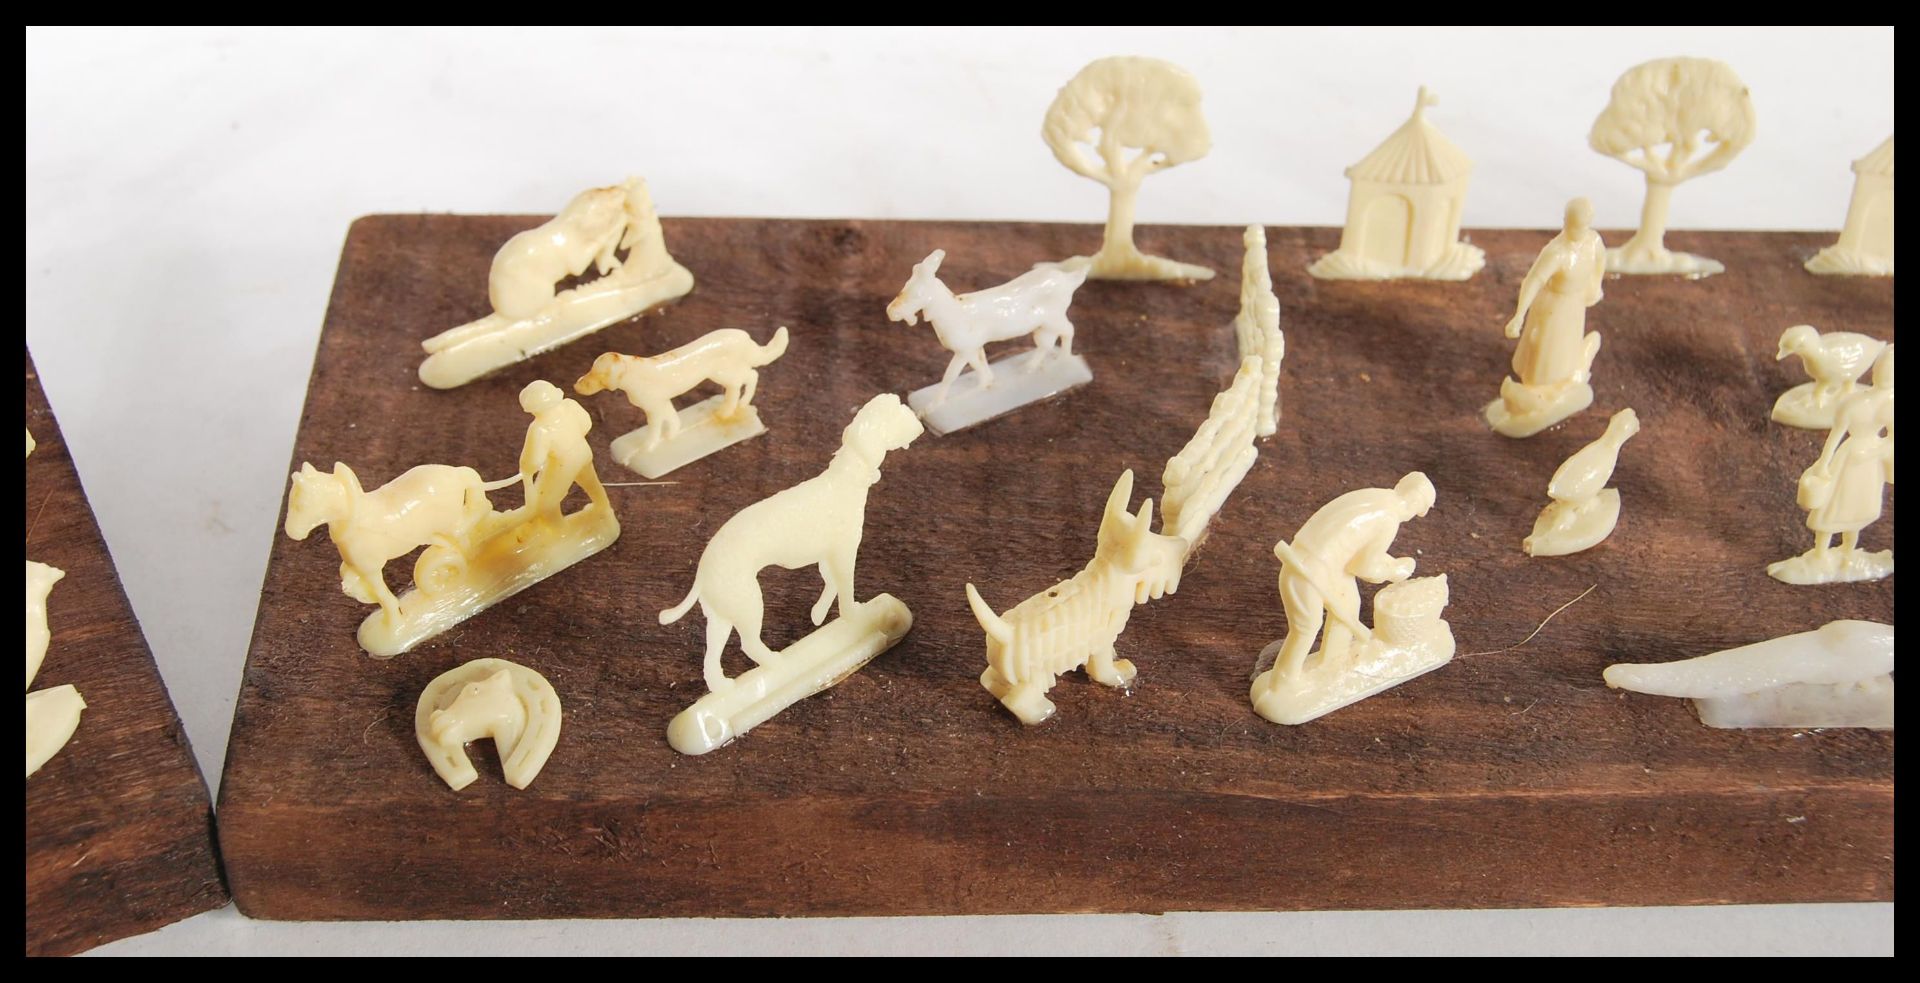 A selection of white faux ivory cast resin figures of animals mounted on a stained wooden base along - Bild 4 aus 5